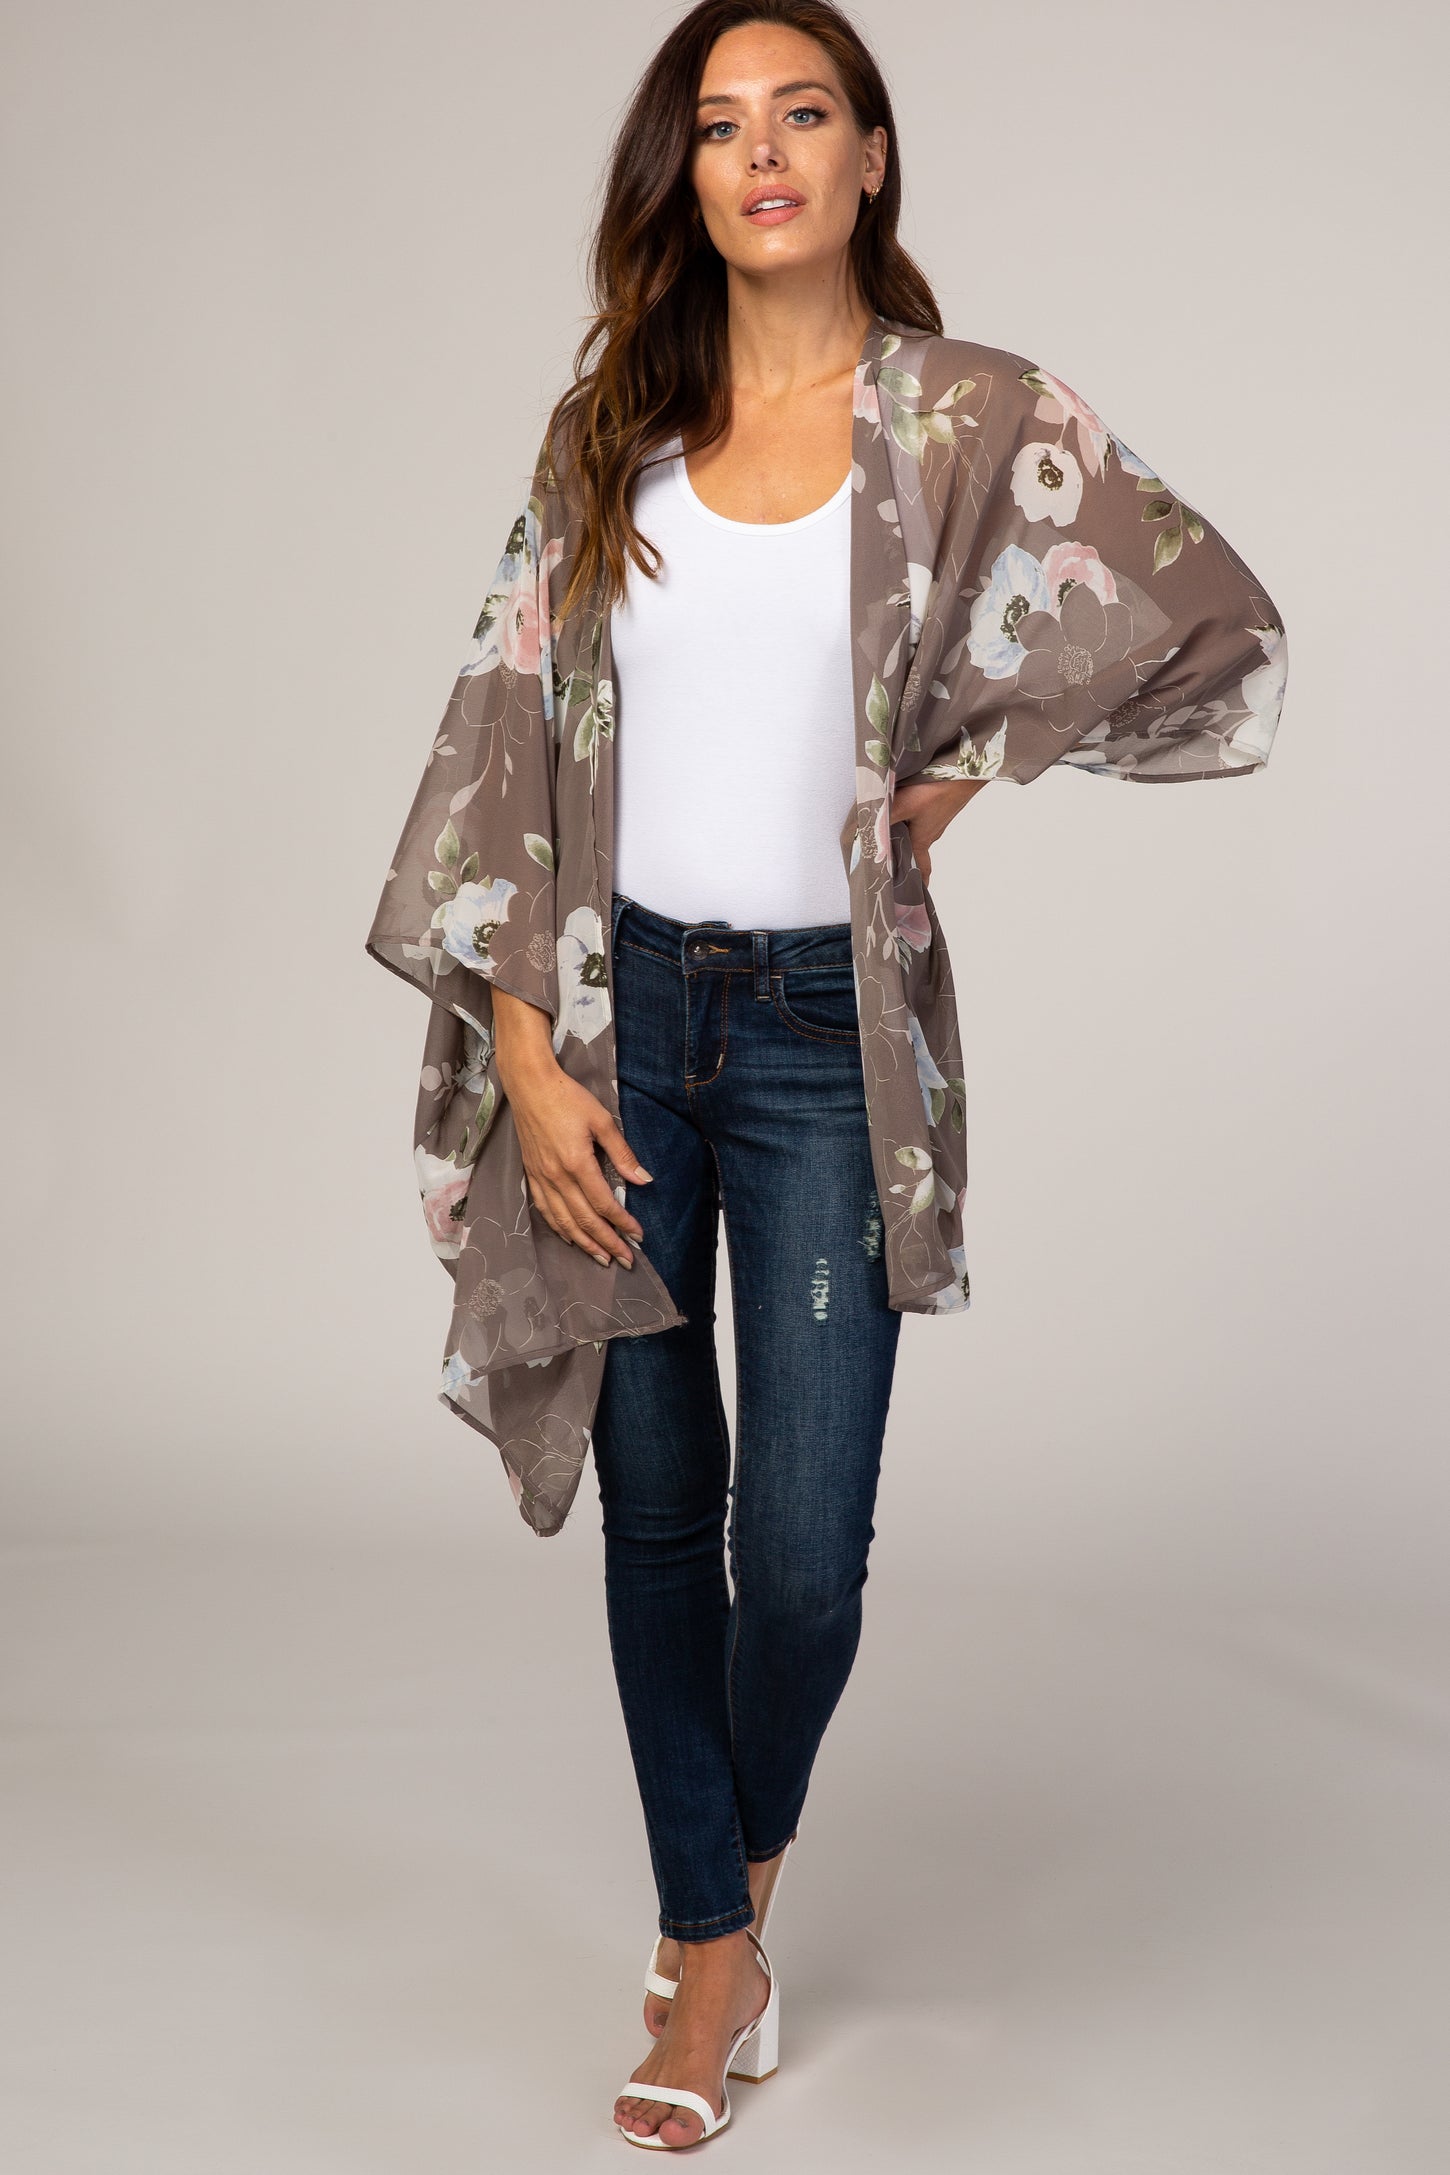 Grey Floral Sheer Maternity Cover Up